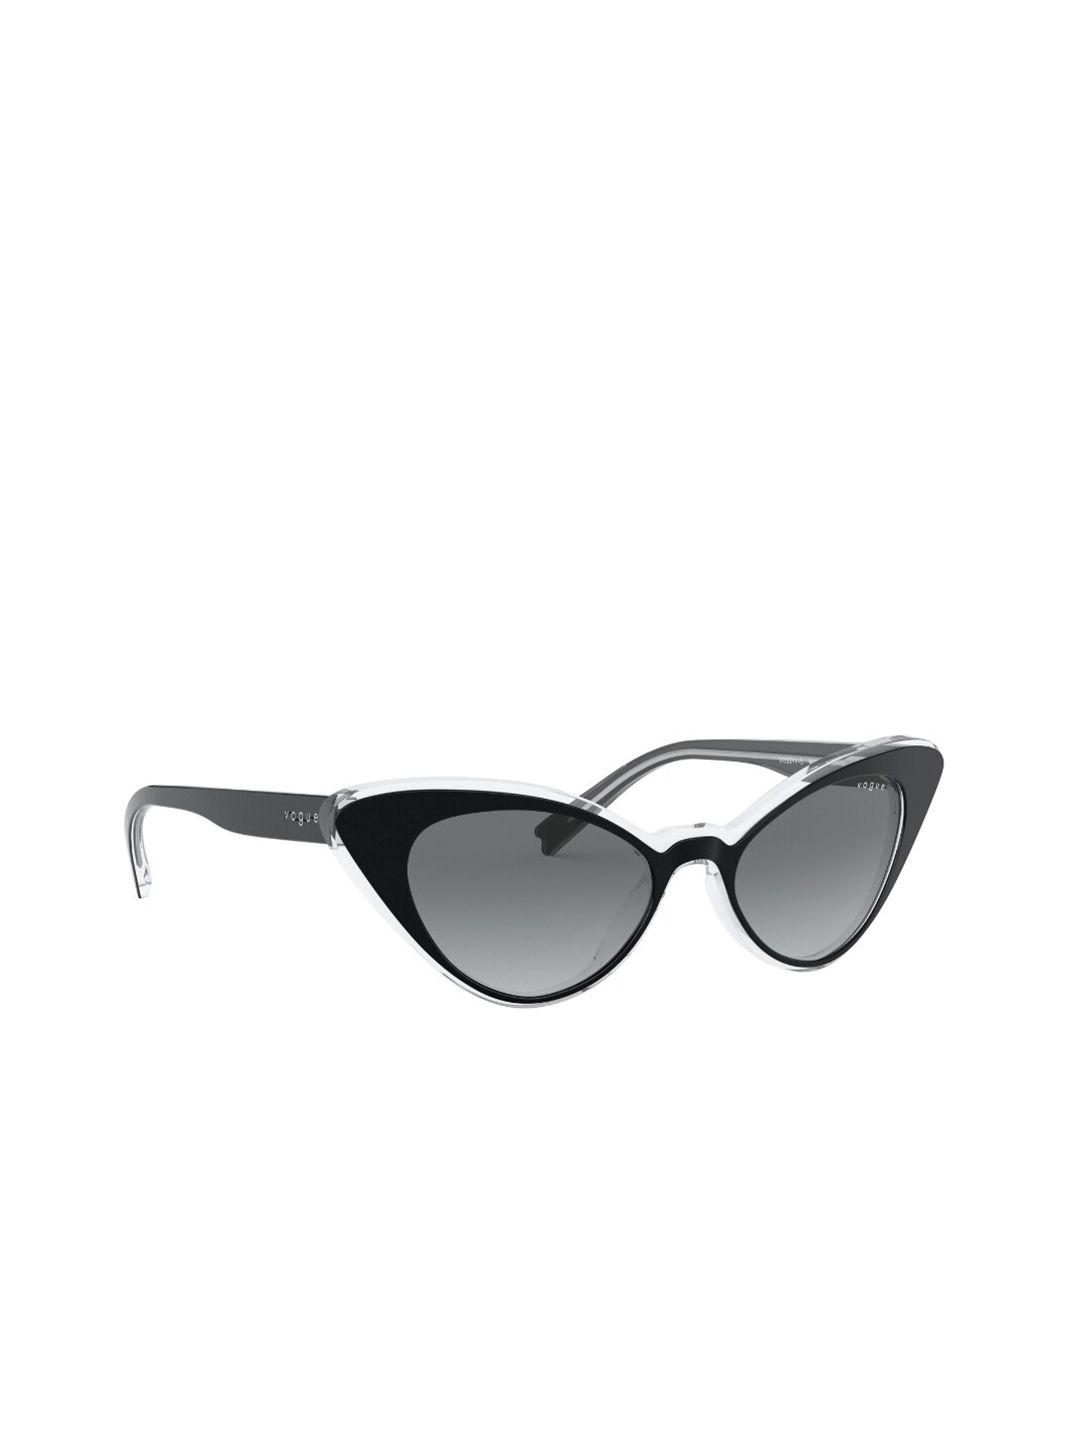 vogue women cateye sunglasses with uv protected lens